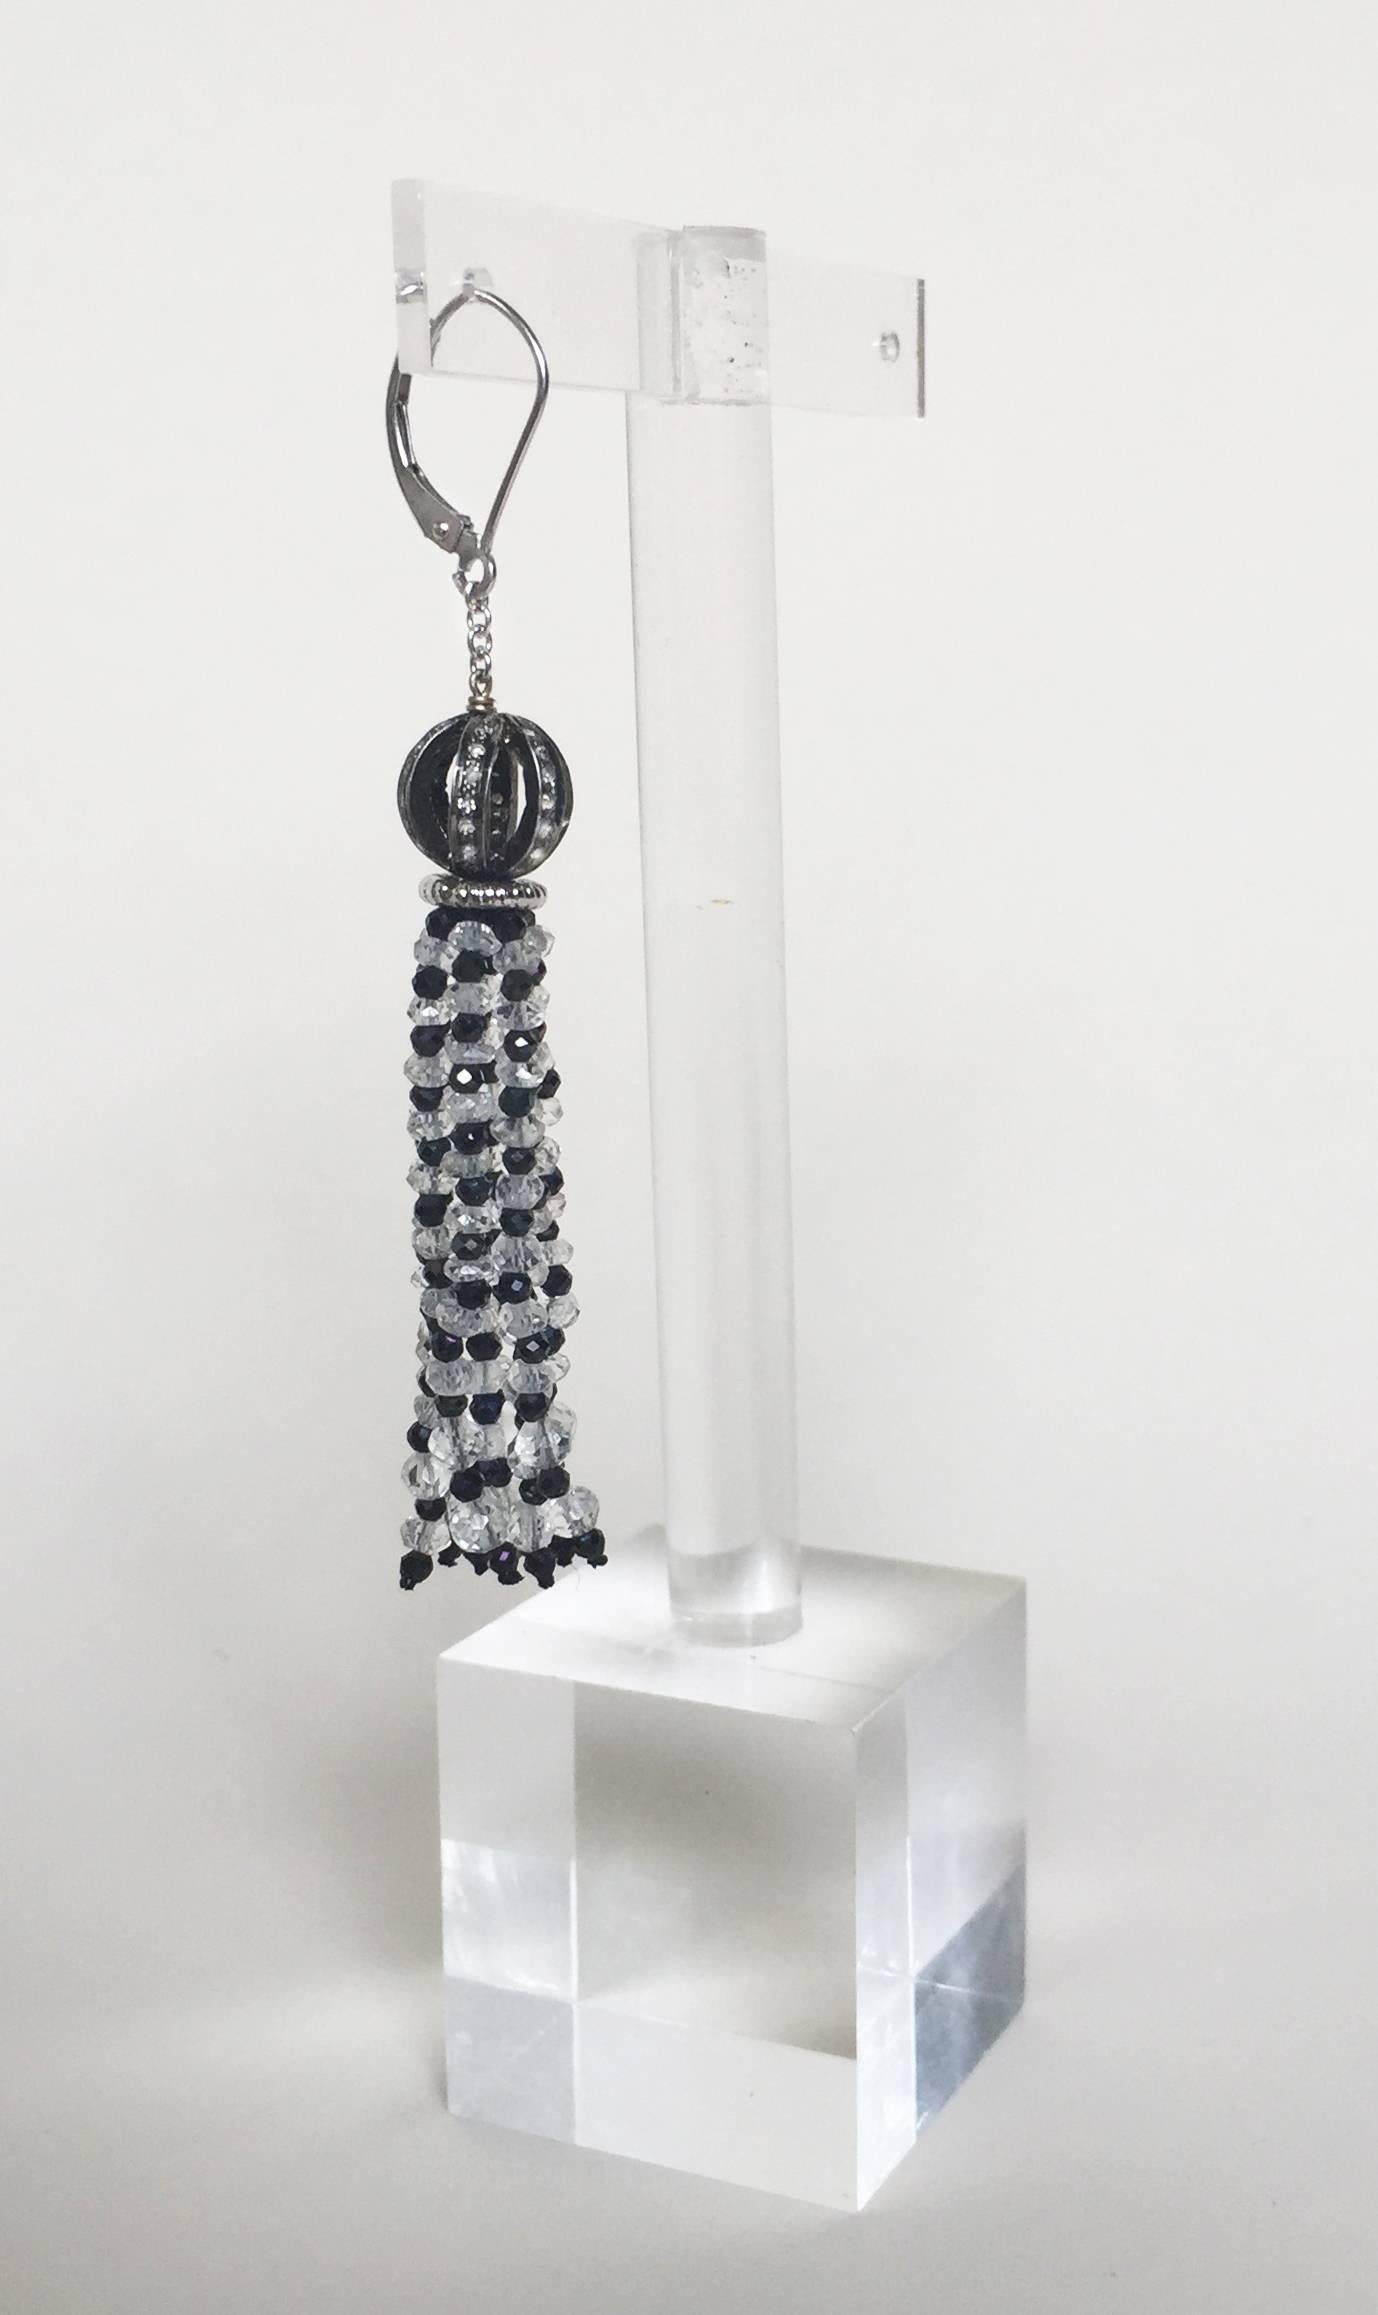 These one of kind earrings designed by Marina J are striking for there quartz and black spinel patterned tassels. They are reminiscent of the Art Deco movement, giving them an air of elegance and whimsy. The earrings are crowned with diamond